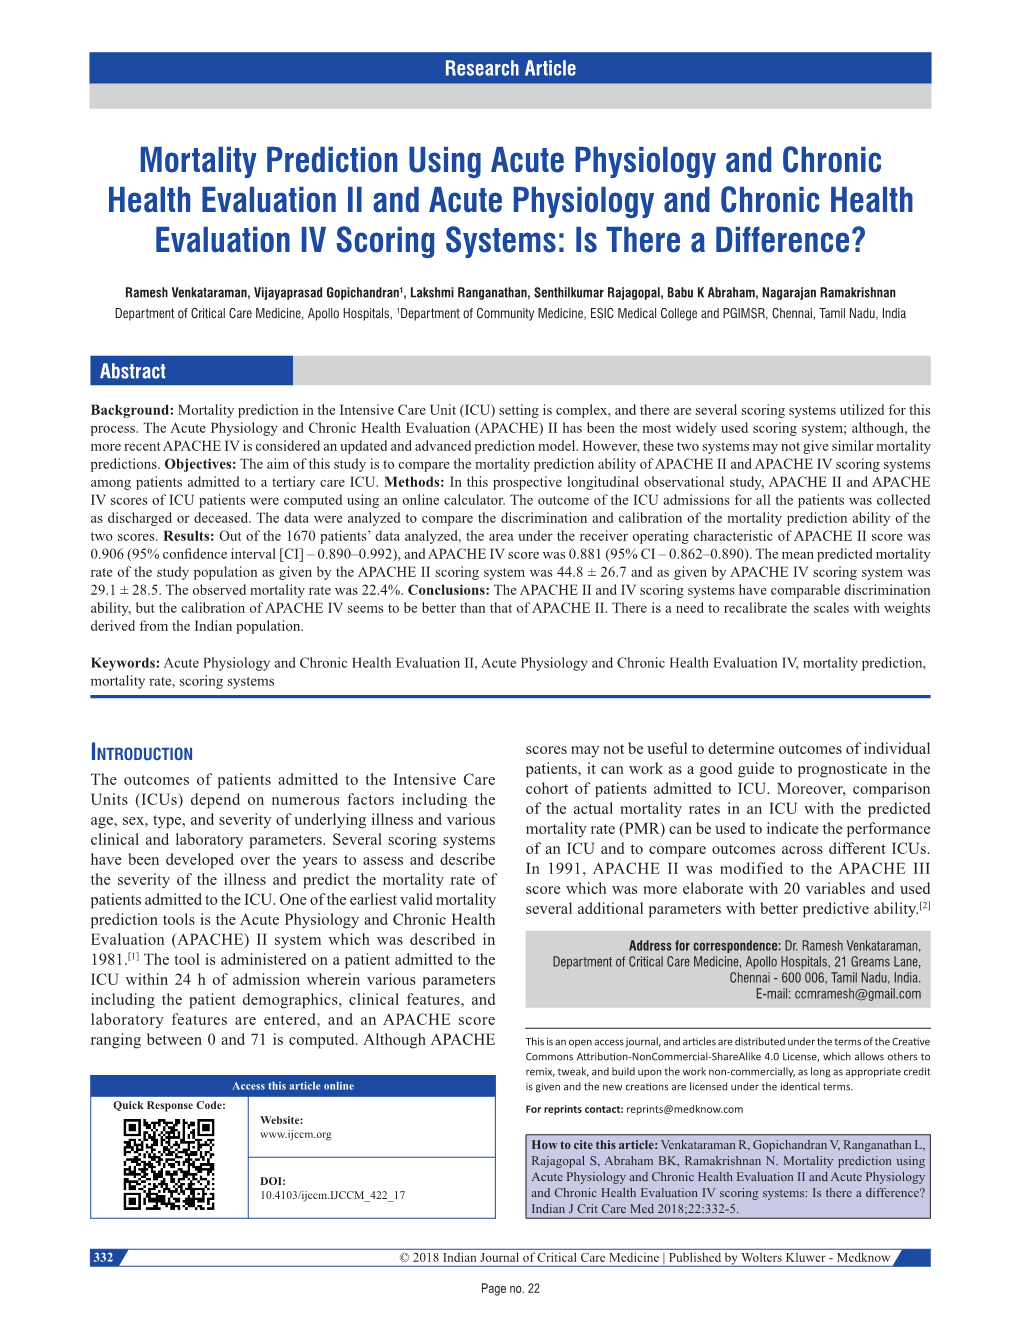 Mortality Prediction Using Acute Physiology and Chronic Health